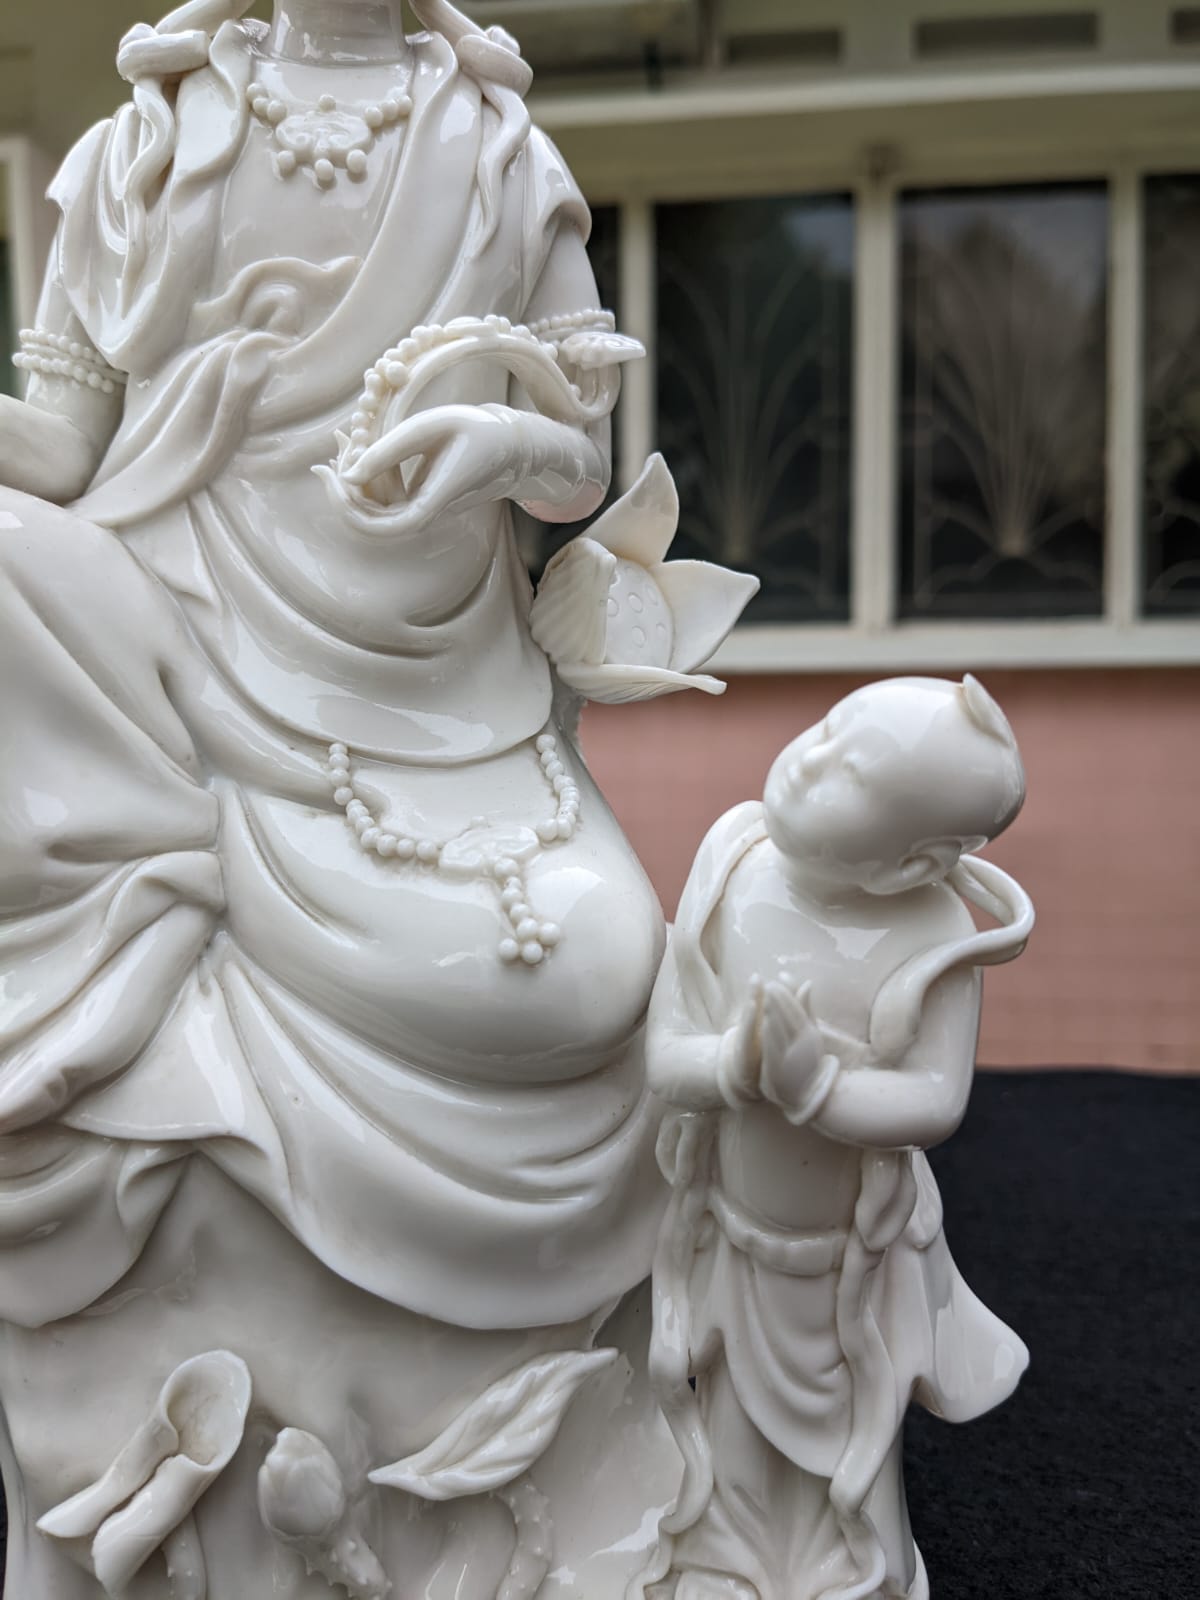 TWO BLANC DE CHINE PORCELAIN FIGURES OF GUANYIN - Image 3 of 12